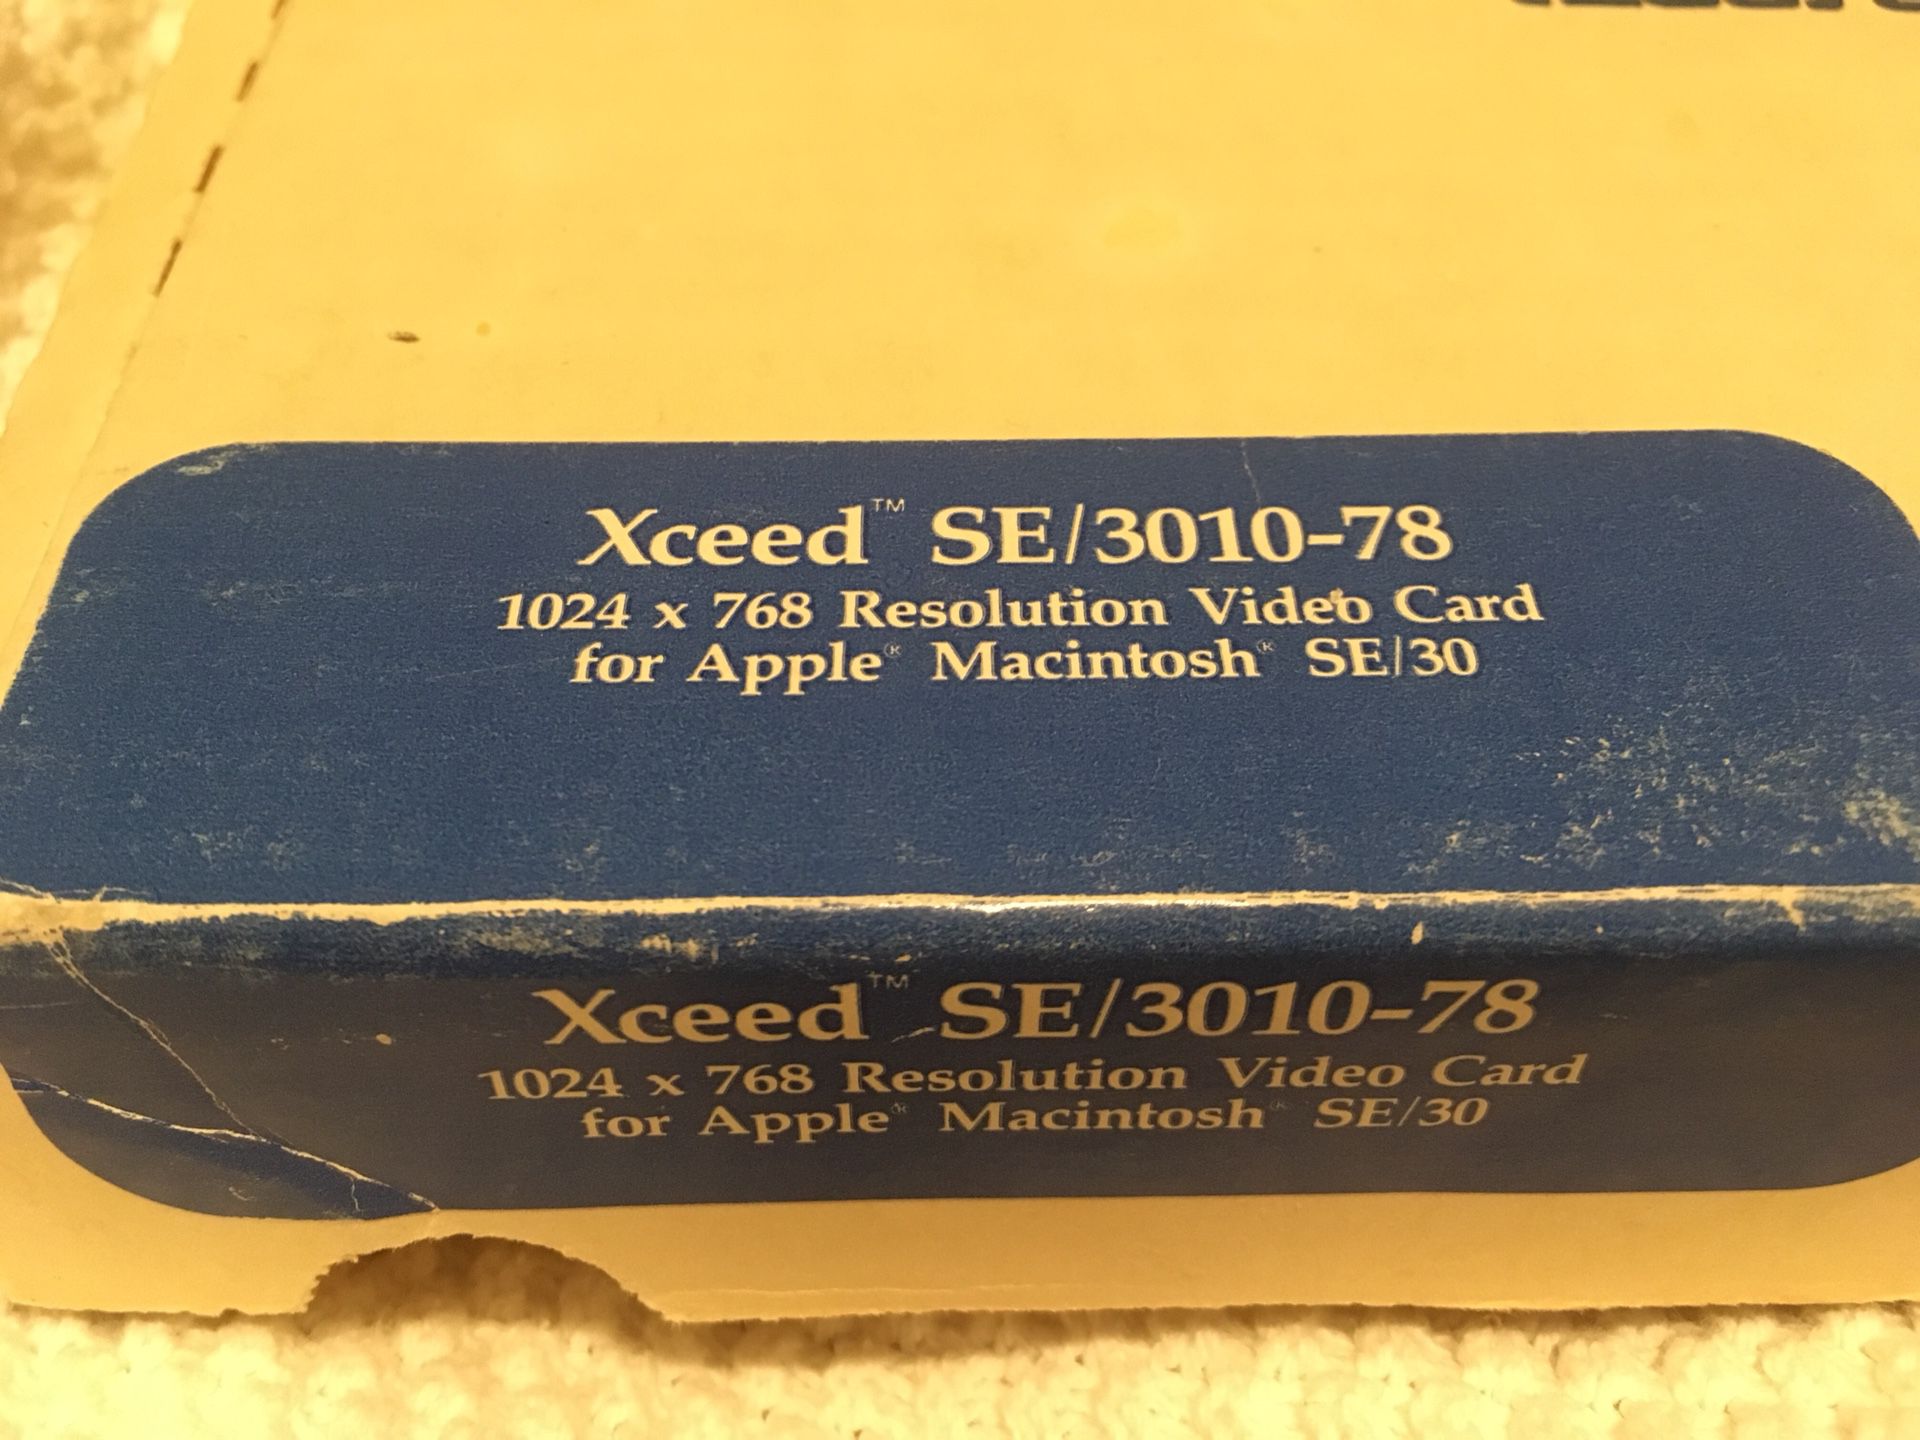 RARE vintage Micron Xceed color video card for Mac SE/30